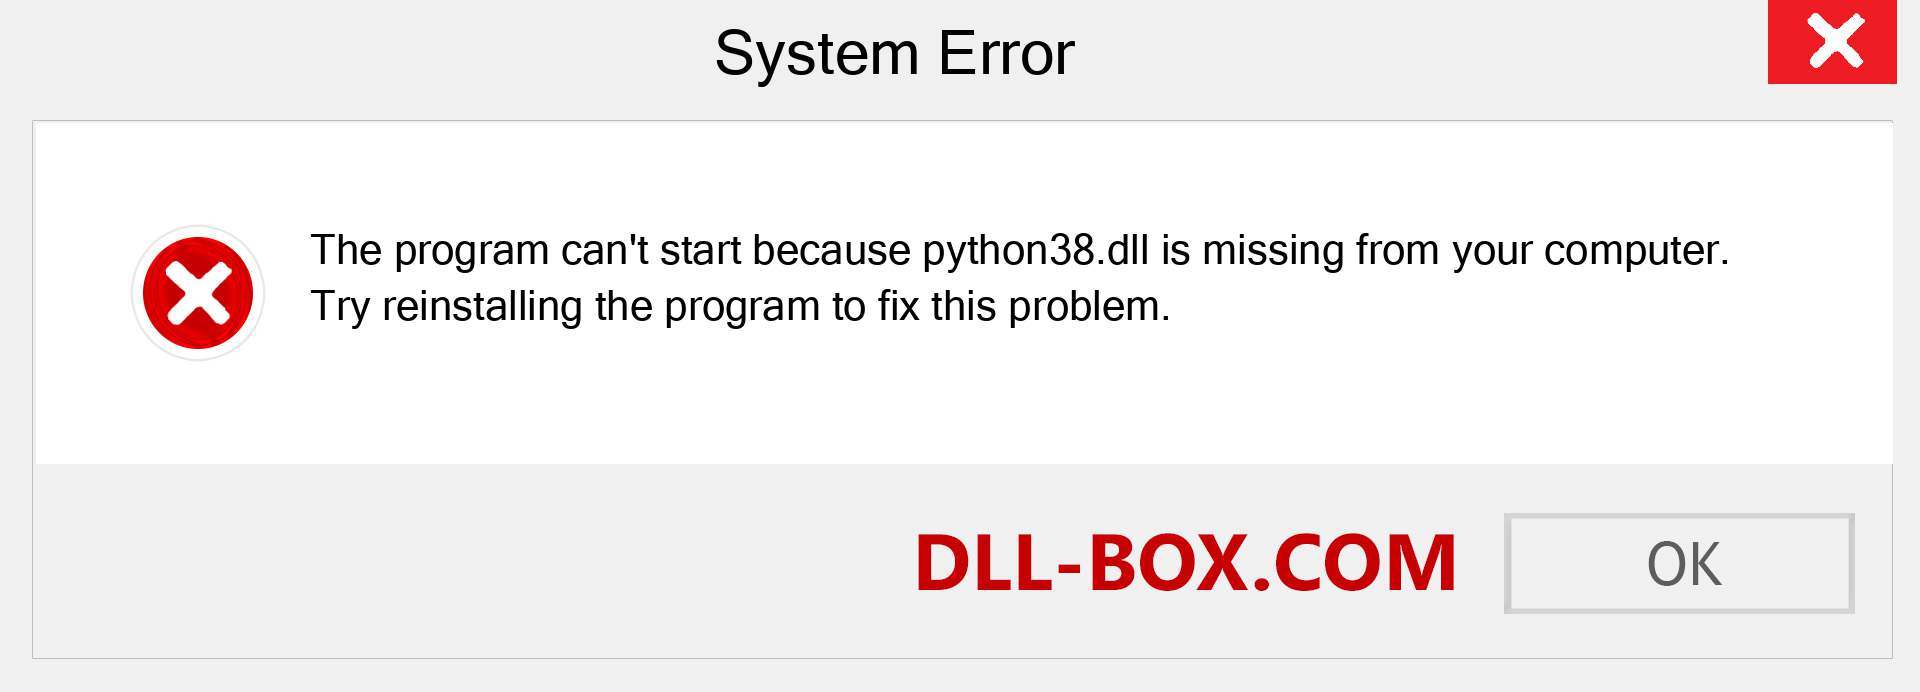  python38.dll file is missing?. Download for Windows 7, 8, 10 - Fix  python38 dll Missing Error on Windows, photos, images